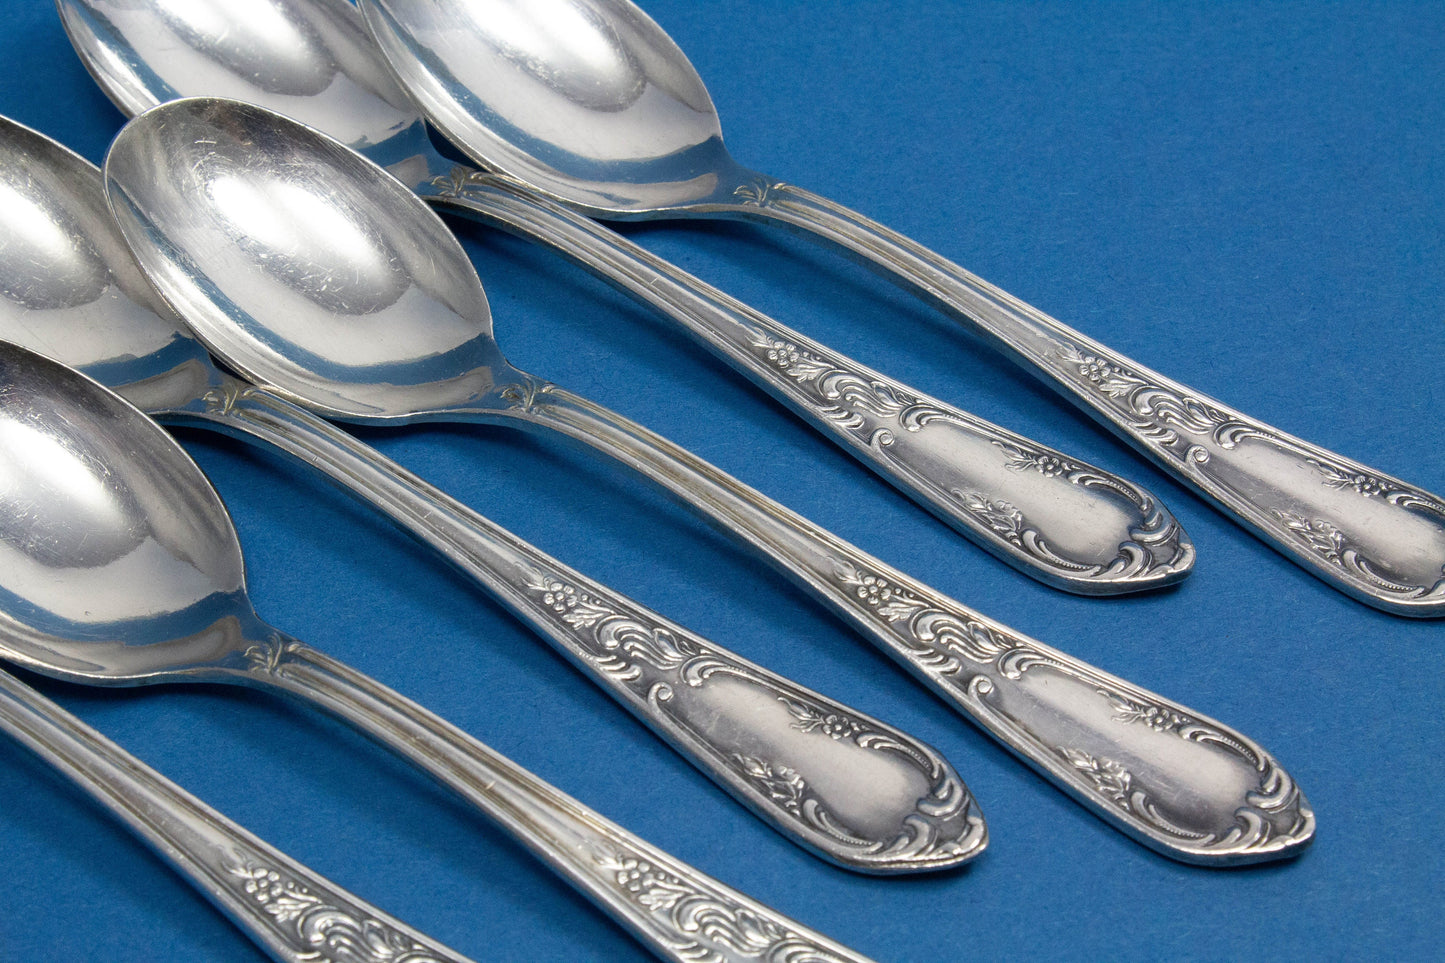 6 silver-plated mocha spoons with rococo pattern